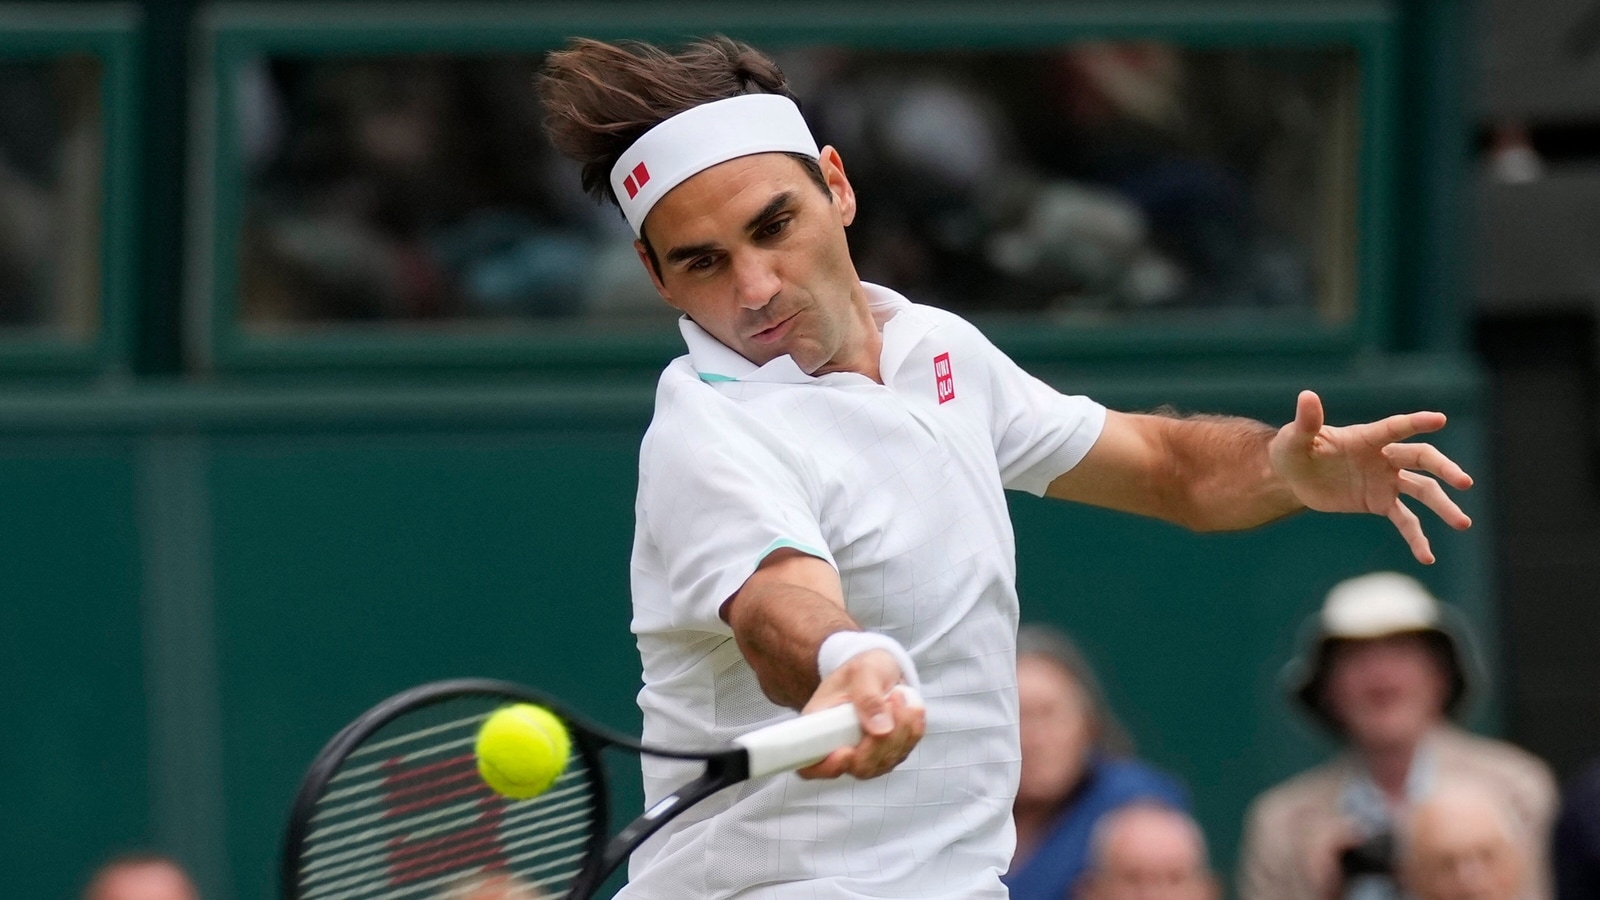 Roger Federer will be missed at Wimbledon, but show will go on: Vijay Amritraj